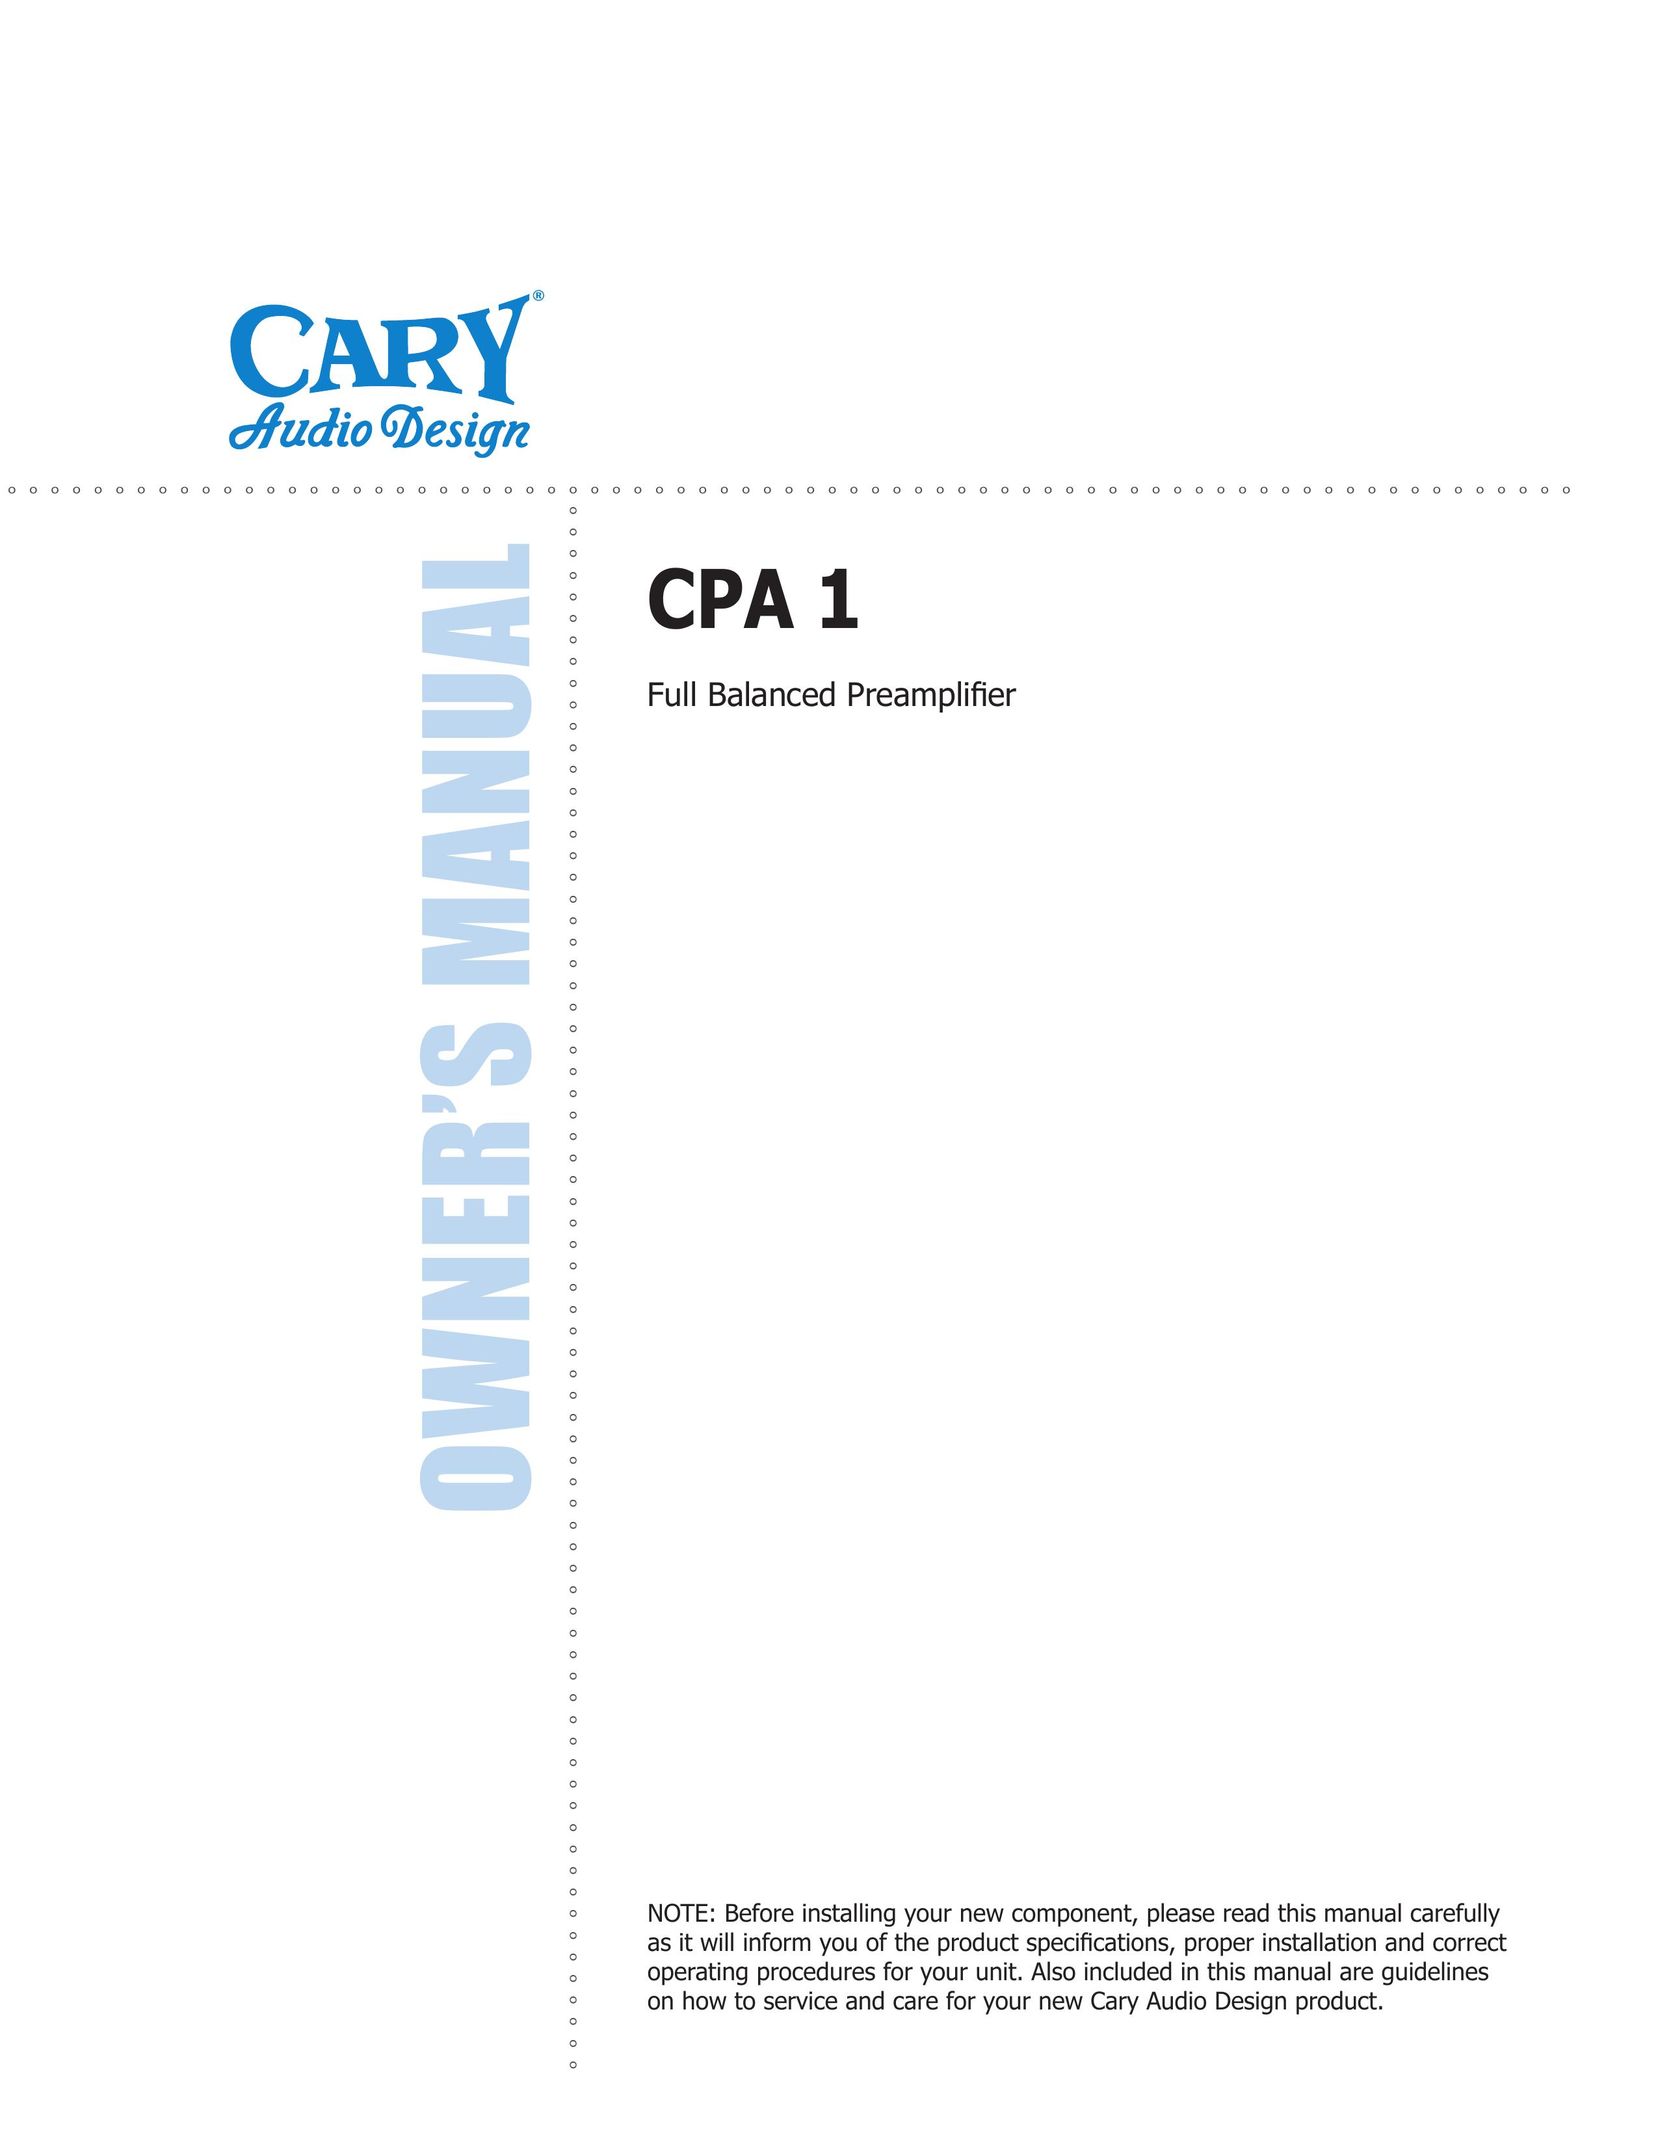 Cary Audio Design CPA 1 Stereo Amplifier User Manual